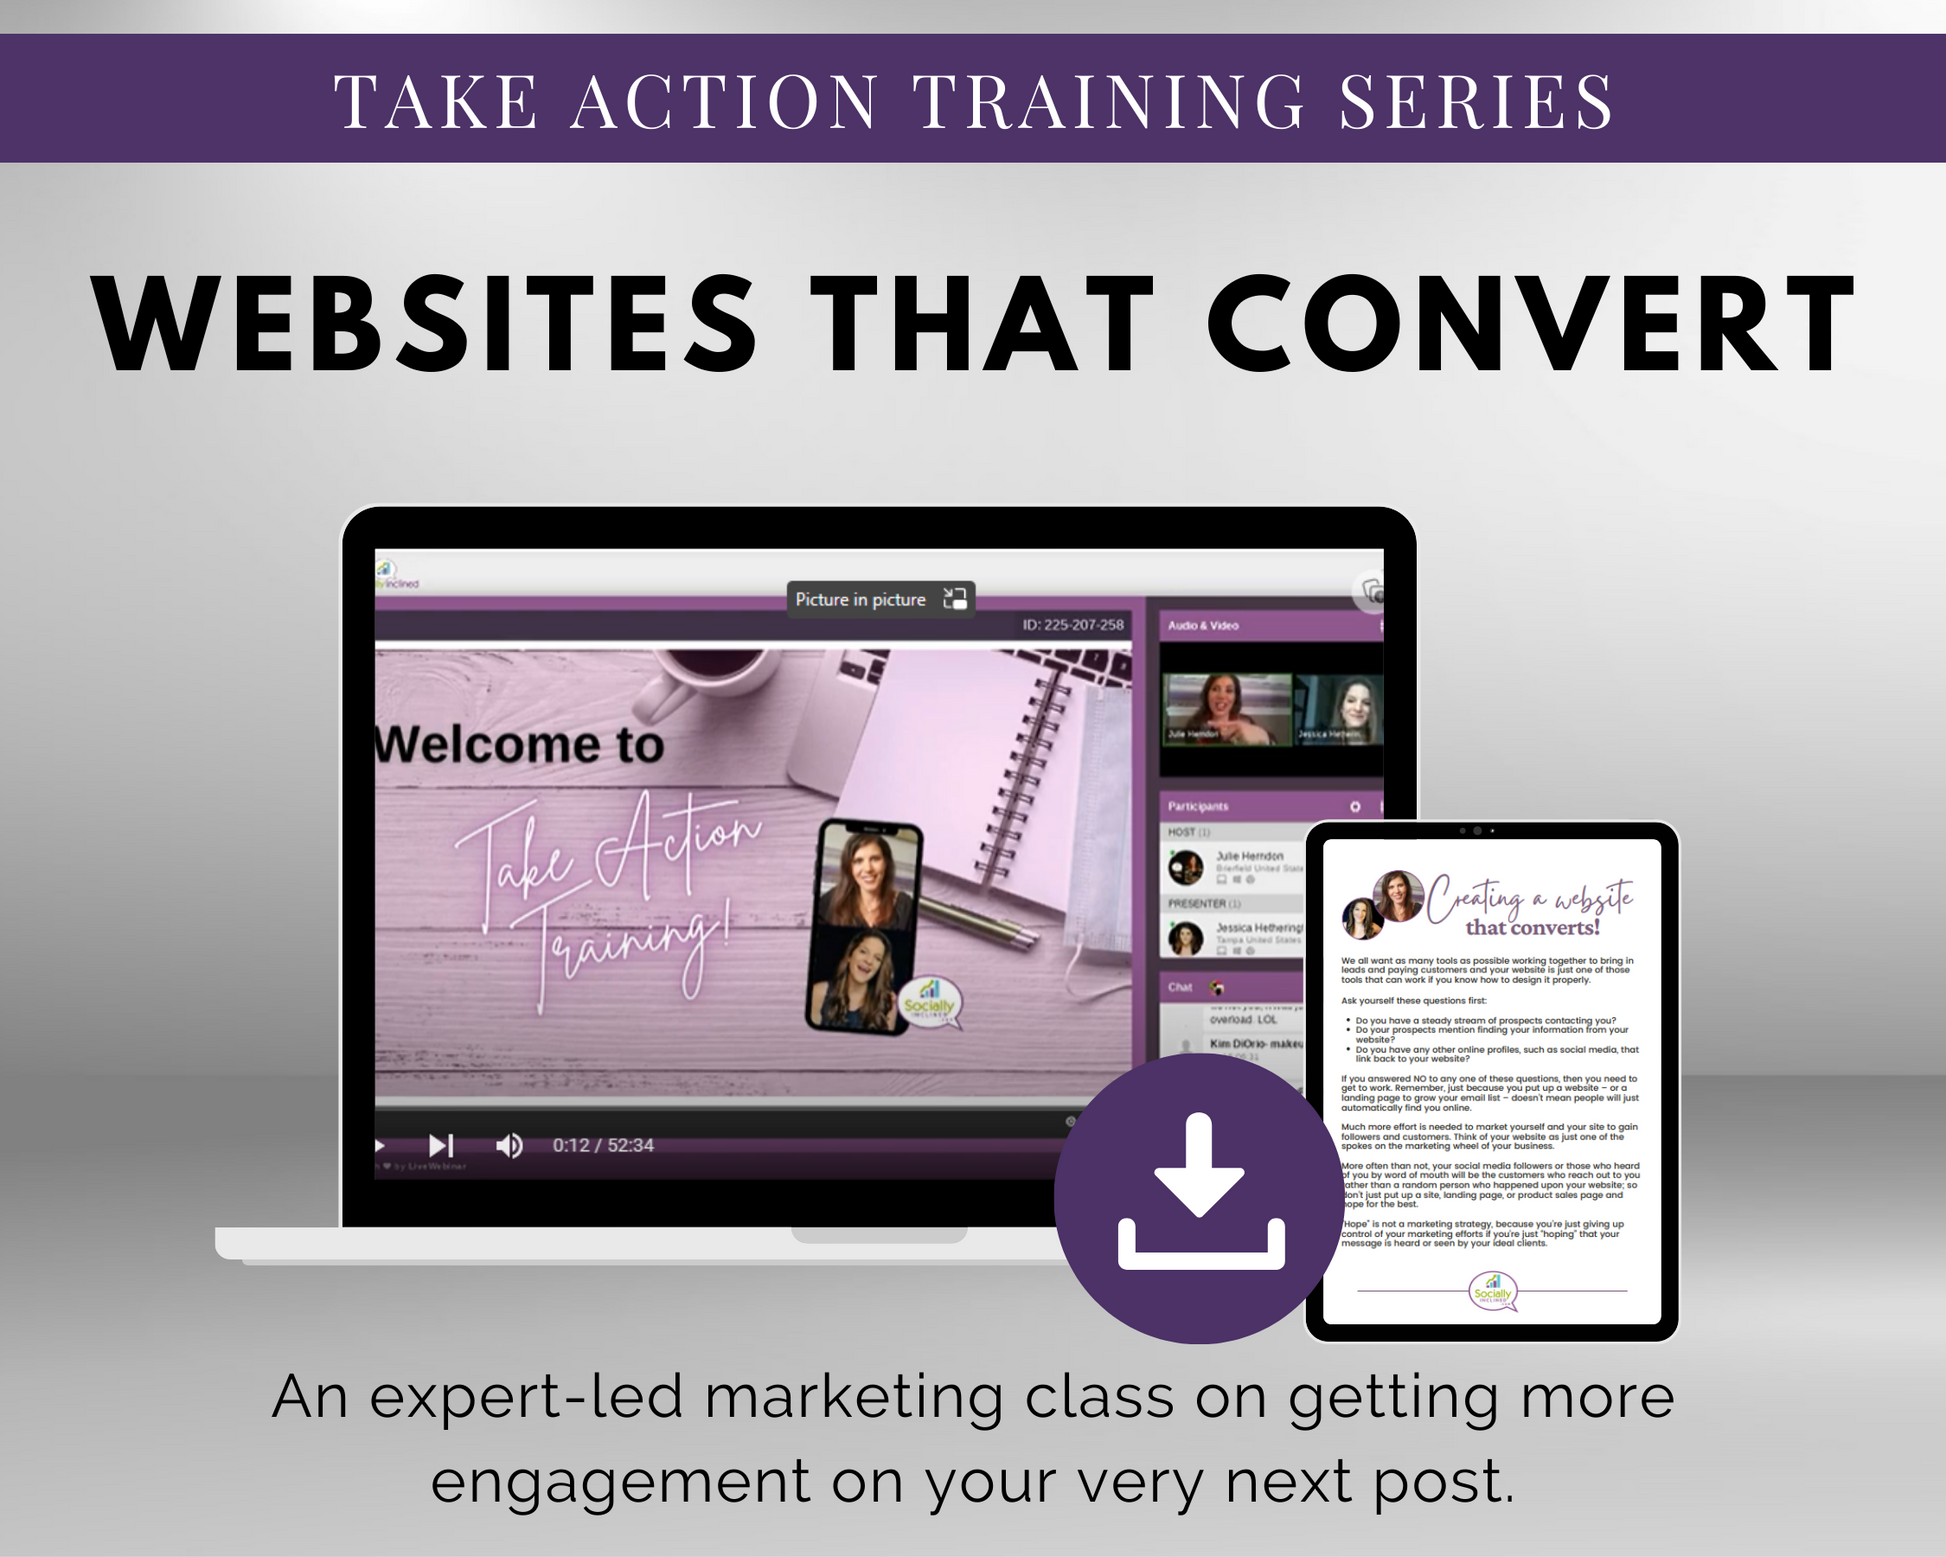 Take the TAT - Websites That Convert Masterclass from Get Socially Inclined.